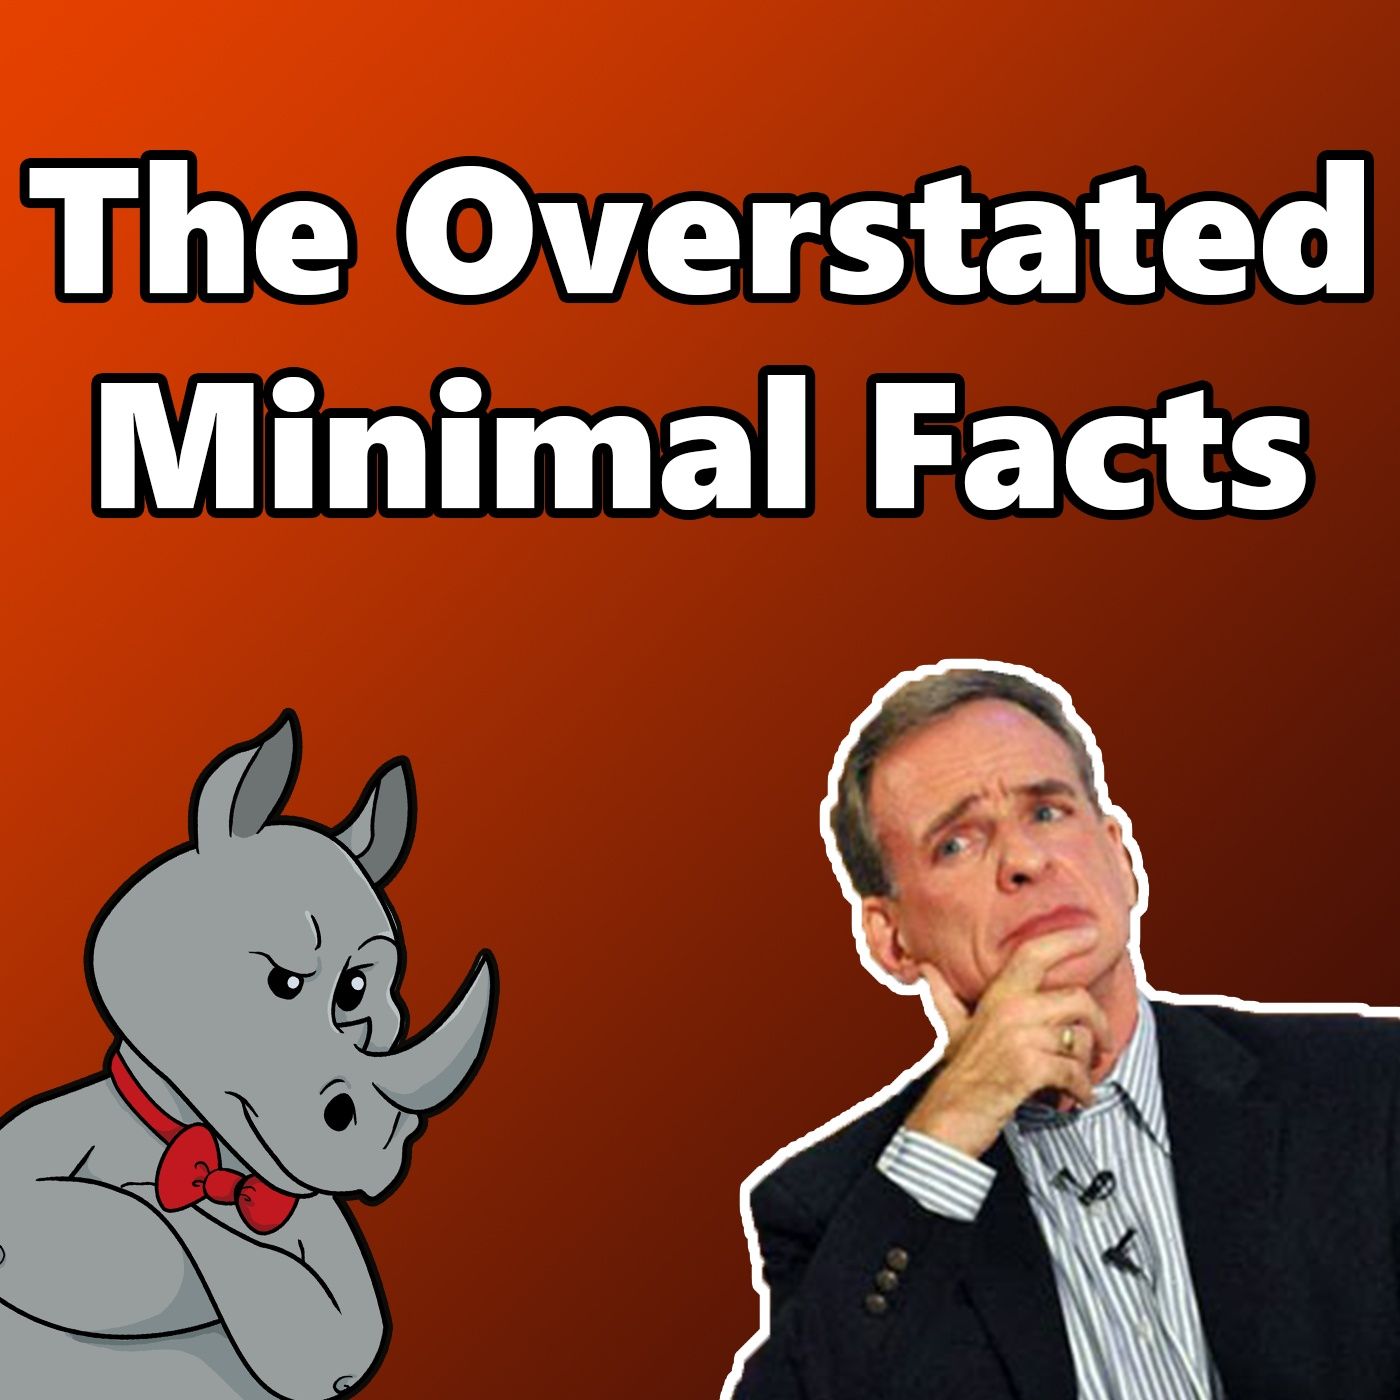 Overstating the Minimal Facts Argument!